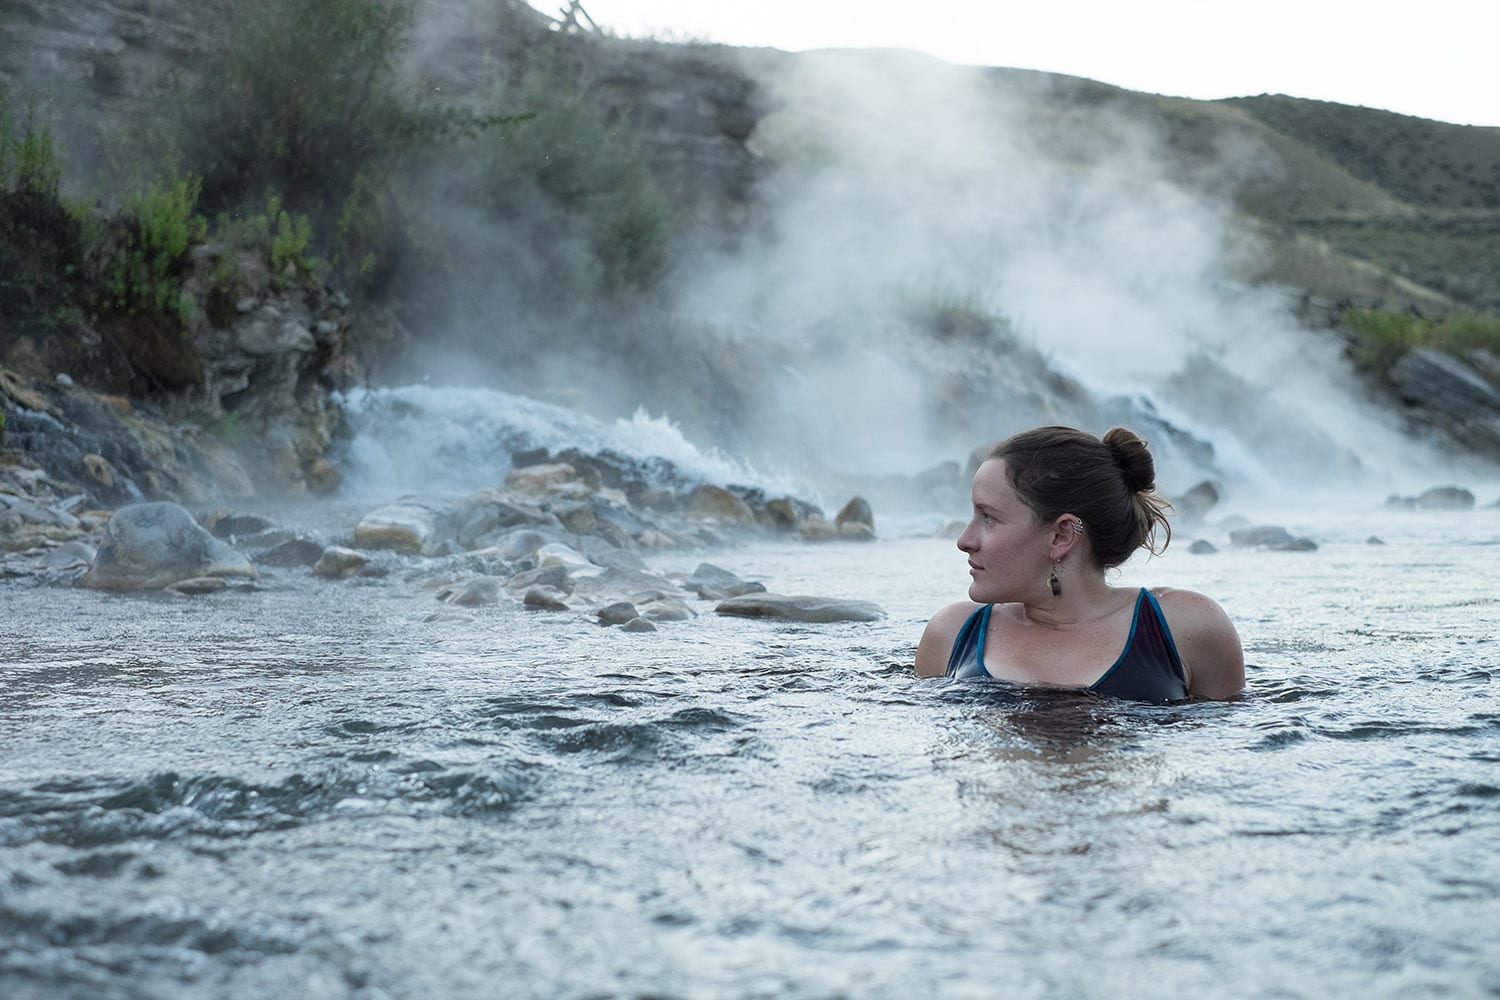 A young woman enjoys a nice dip in a steamy river, the Boiling River in Montana